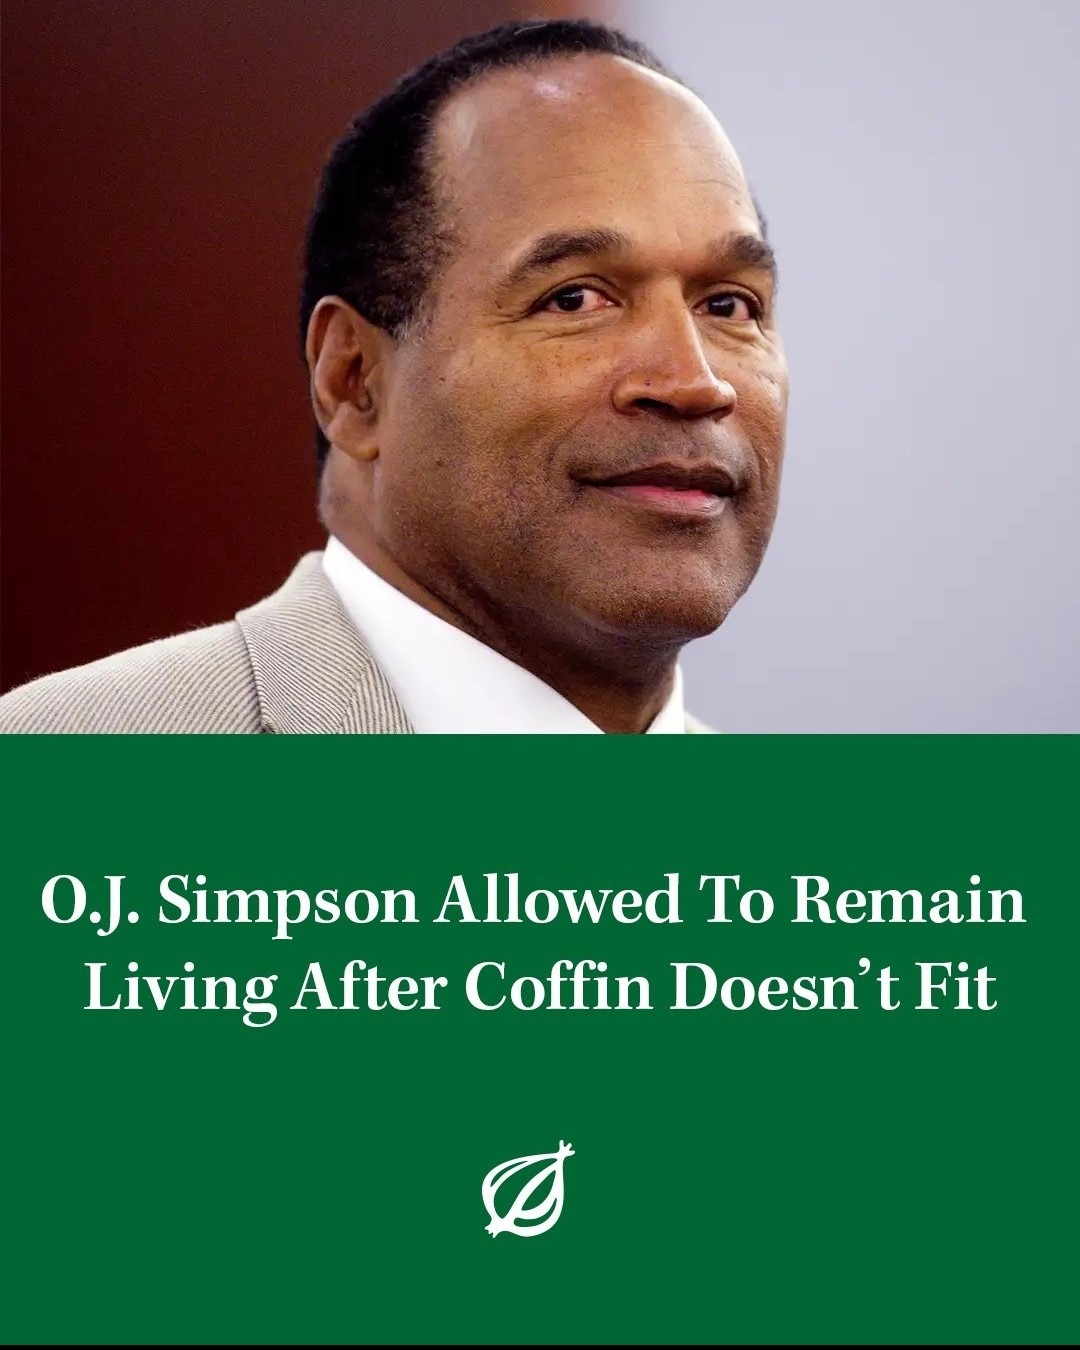 The Onion is really funny, chack it out - meme